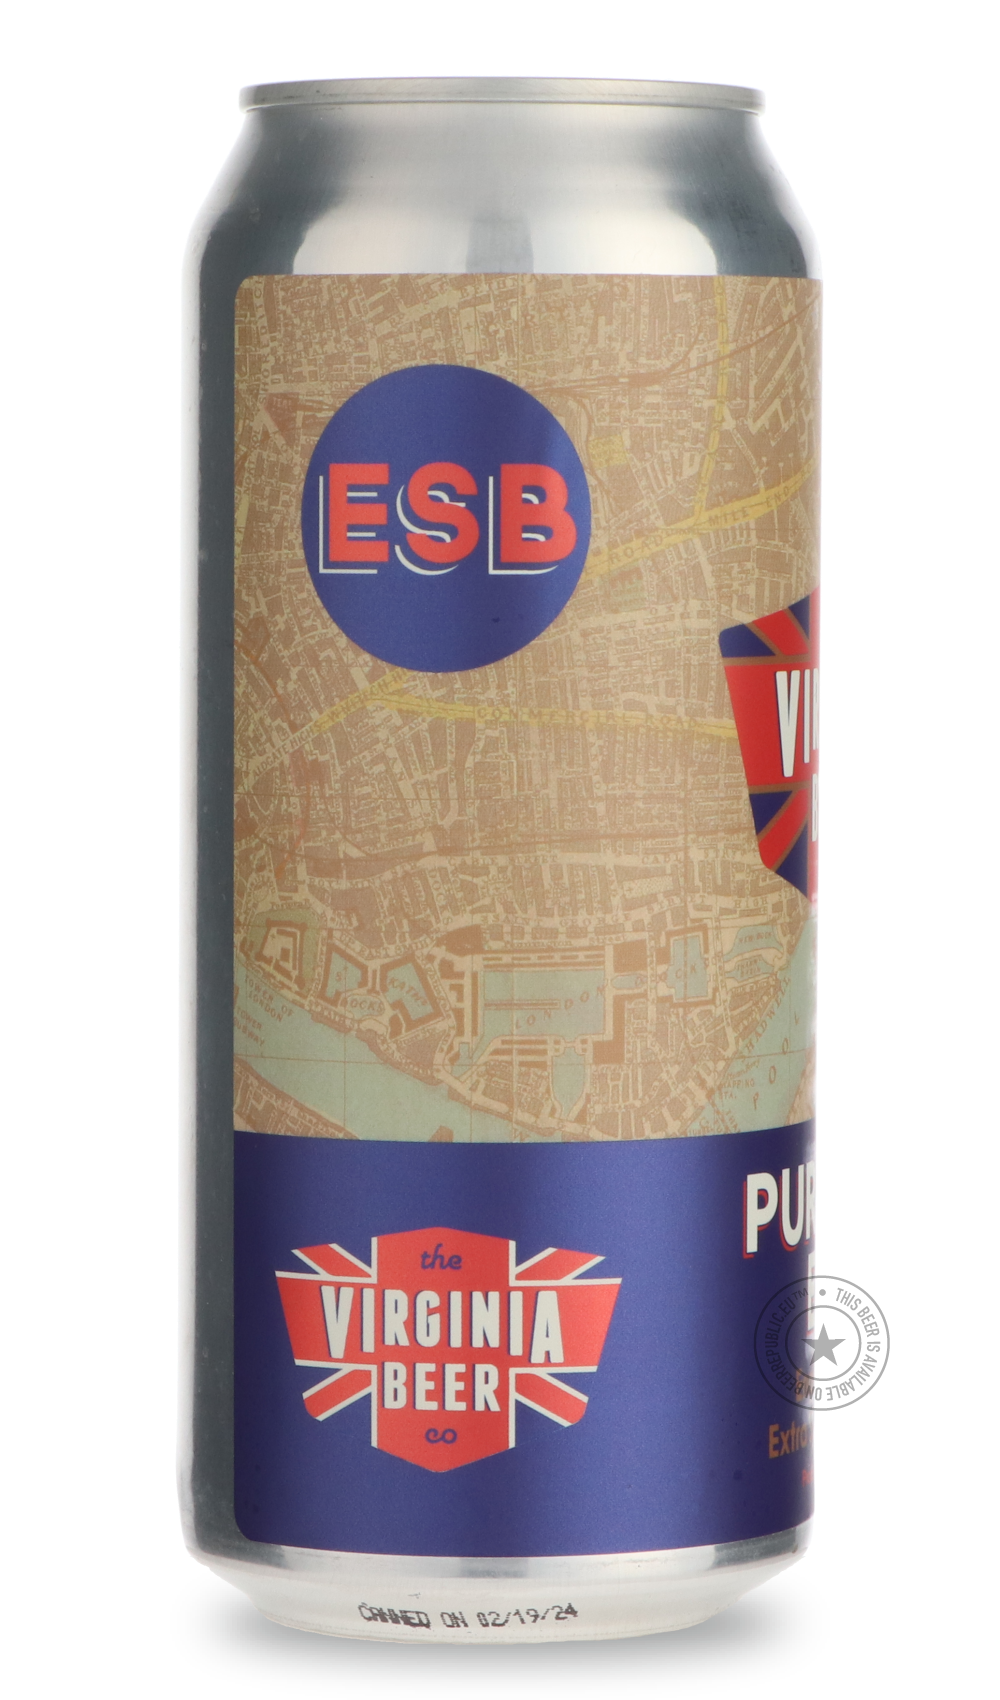 -The Virginia Beer Company- Purley's ESB-Pale- Only @ Beer Republic - The best online beer store for American & Canadian craft beer - Buy beer online from the USA and Canada - Bier online kopen - Amerikaans bier kopen - Craft beer store - Craft beer kopen - Amerikanisch bier kaufen - Bier online kaufen - Acheter biere online - IPA - Stout - Porter - New England IPA - Hazy IPA - Imperial Stout - Barrel Aged - Barrel Aged Imperial Stout - Brown - Dark beer - Blond - Blonde - Pilsner - Lager - Wheat - Weizen -